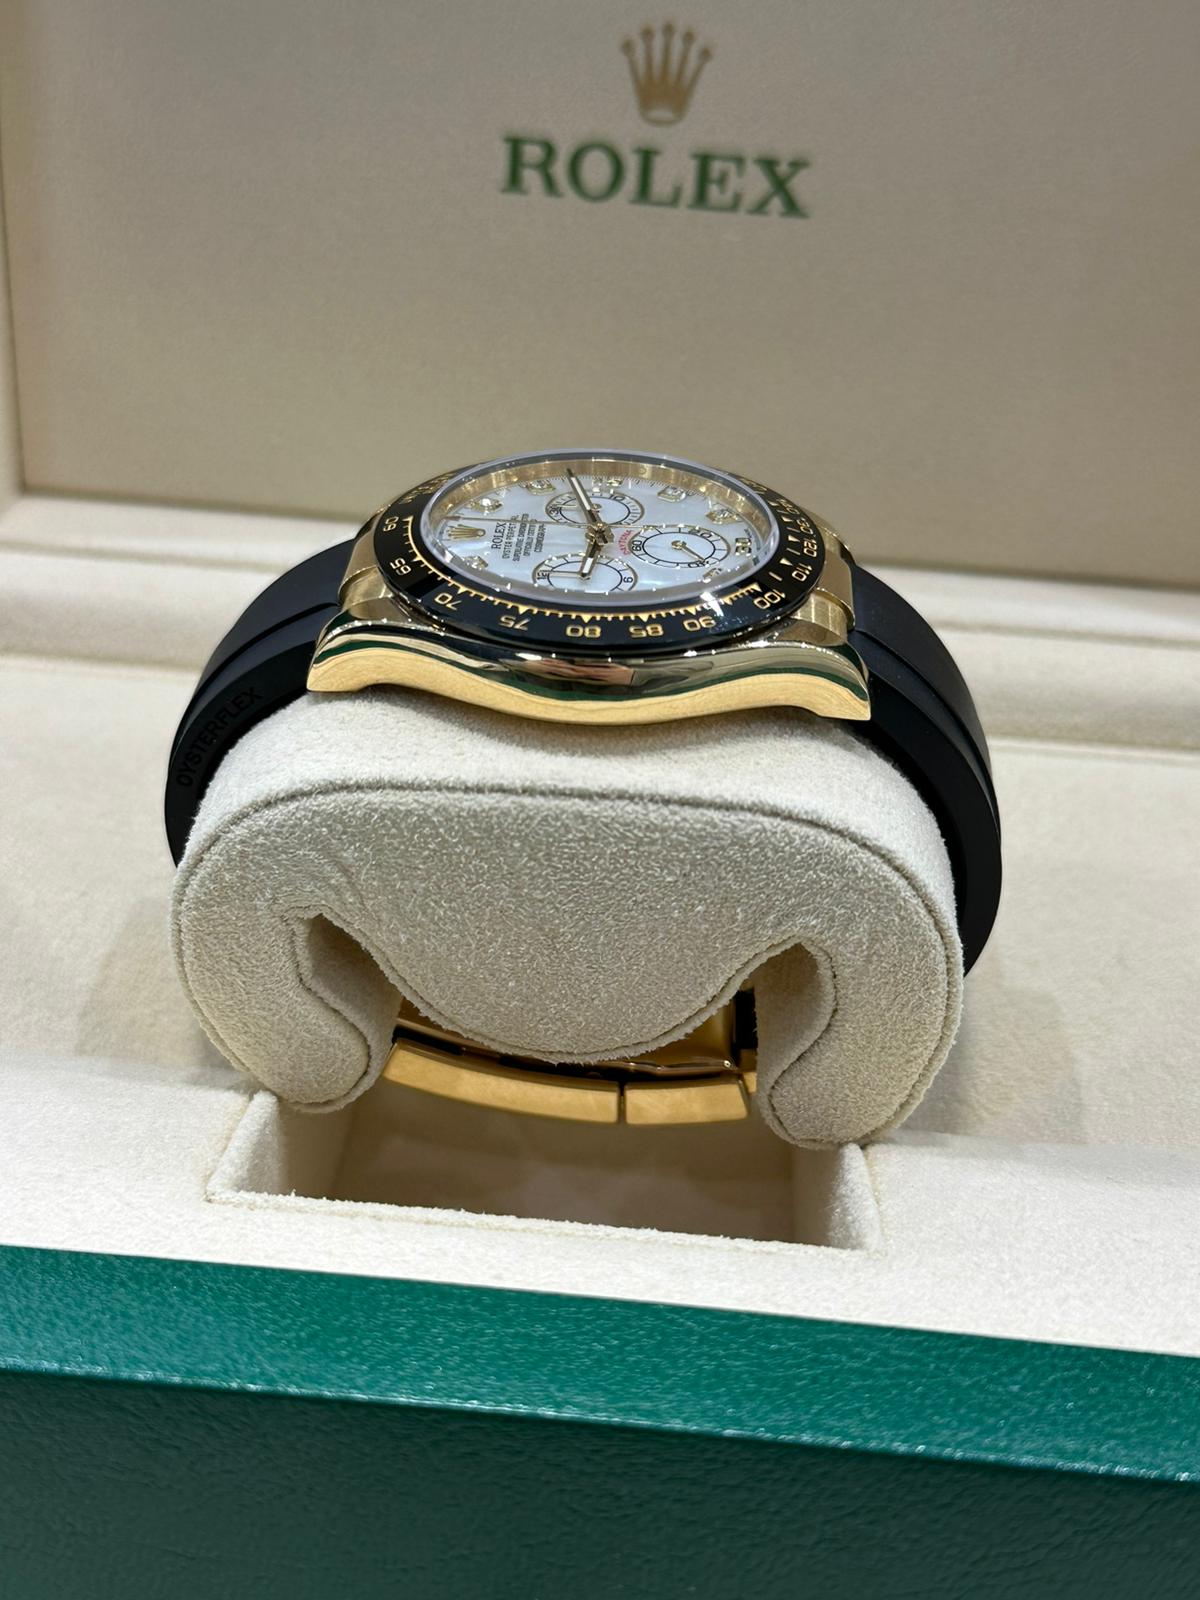 Rolex Daytona Oysterflex Yellow Gold with Rare factory MOP diamond dial complete with box and papers - Image 2 of 8